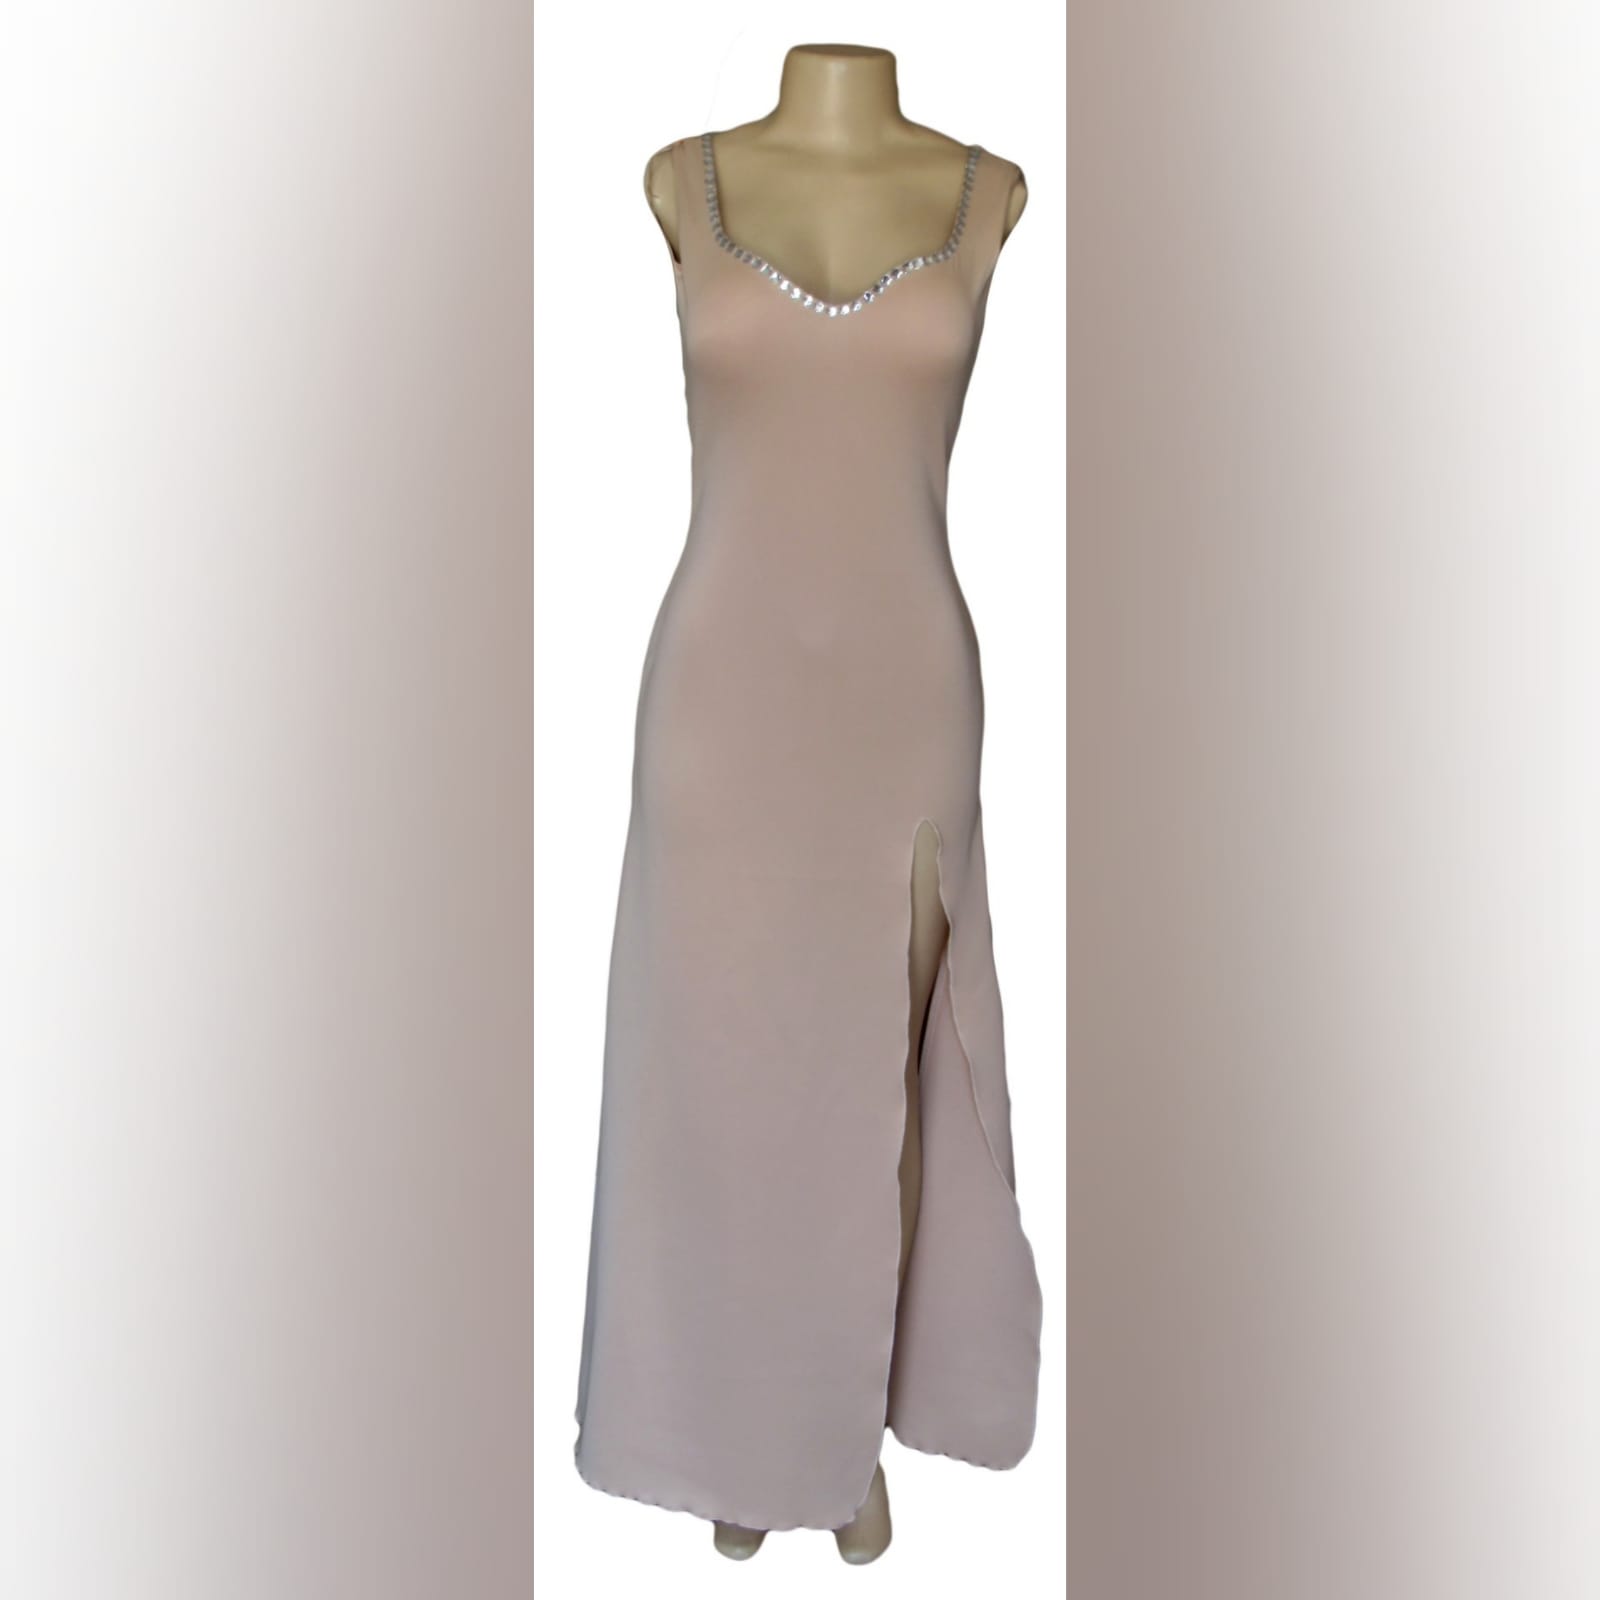 Nude simple elegant formal dress 1 nude simple elegant formal dress with a sweetheart neckline and a low rounded open back. Detailed with silver beads and a slit.